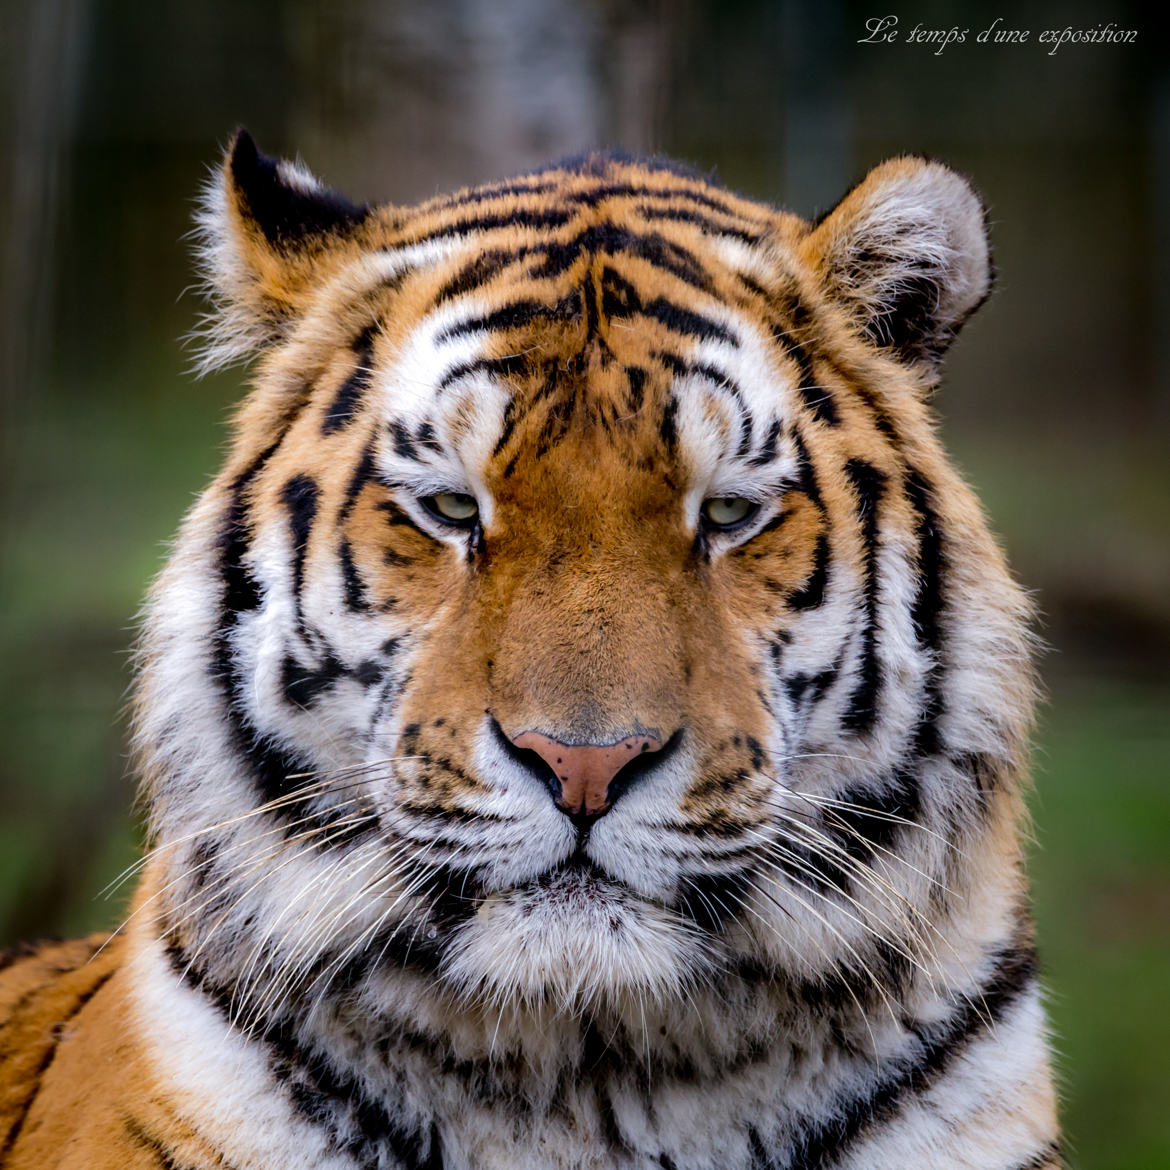 Tigre d'amour